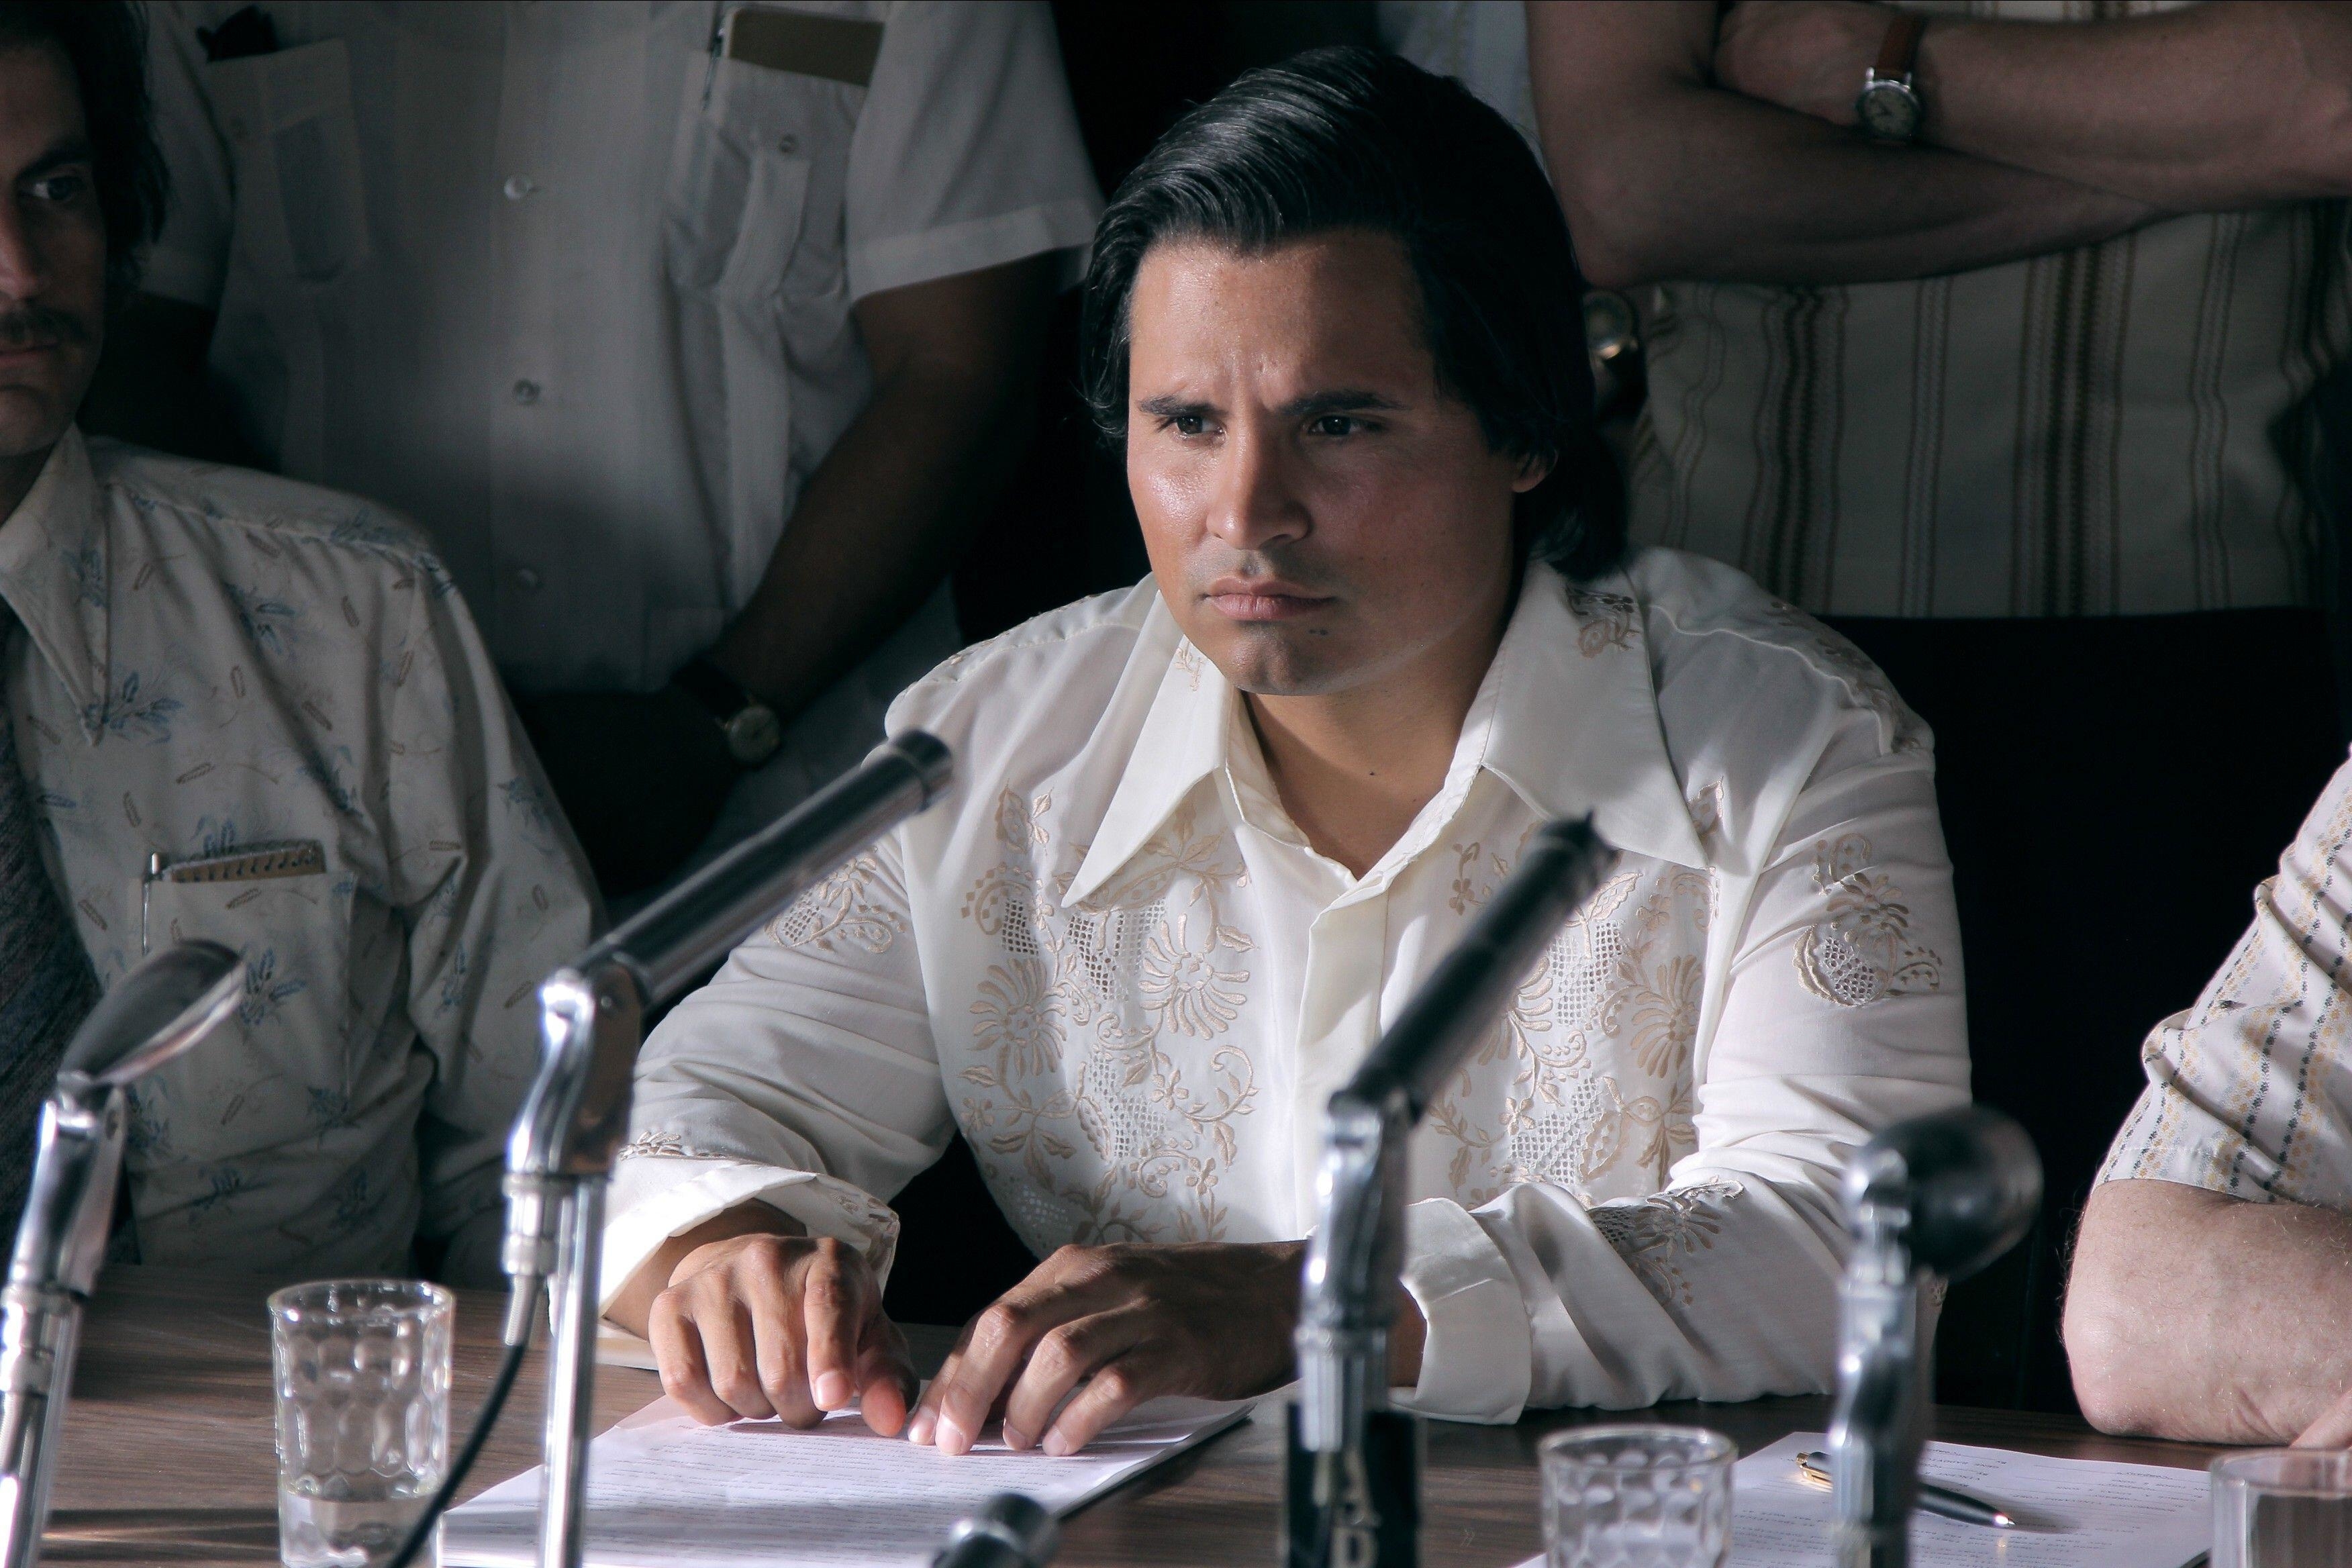 Michael Pena sits intensely near a microphone